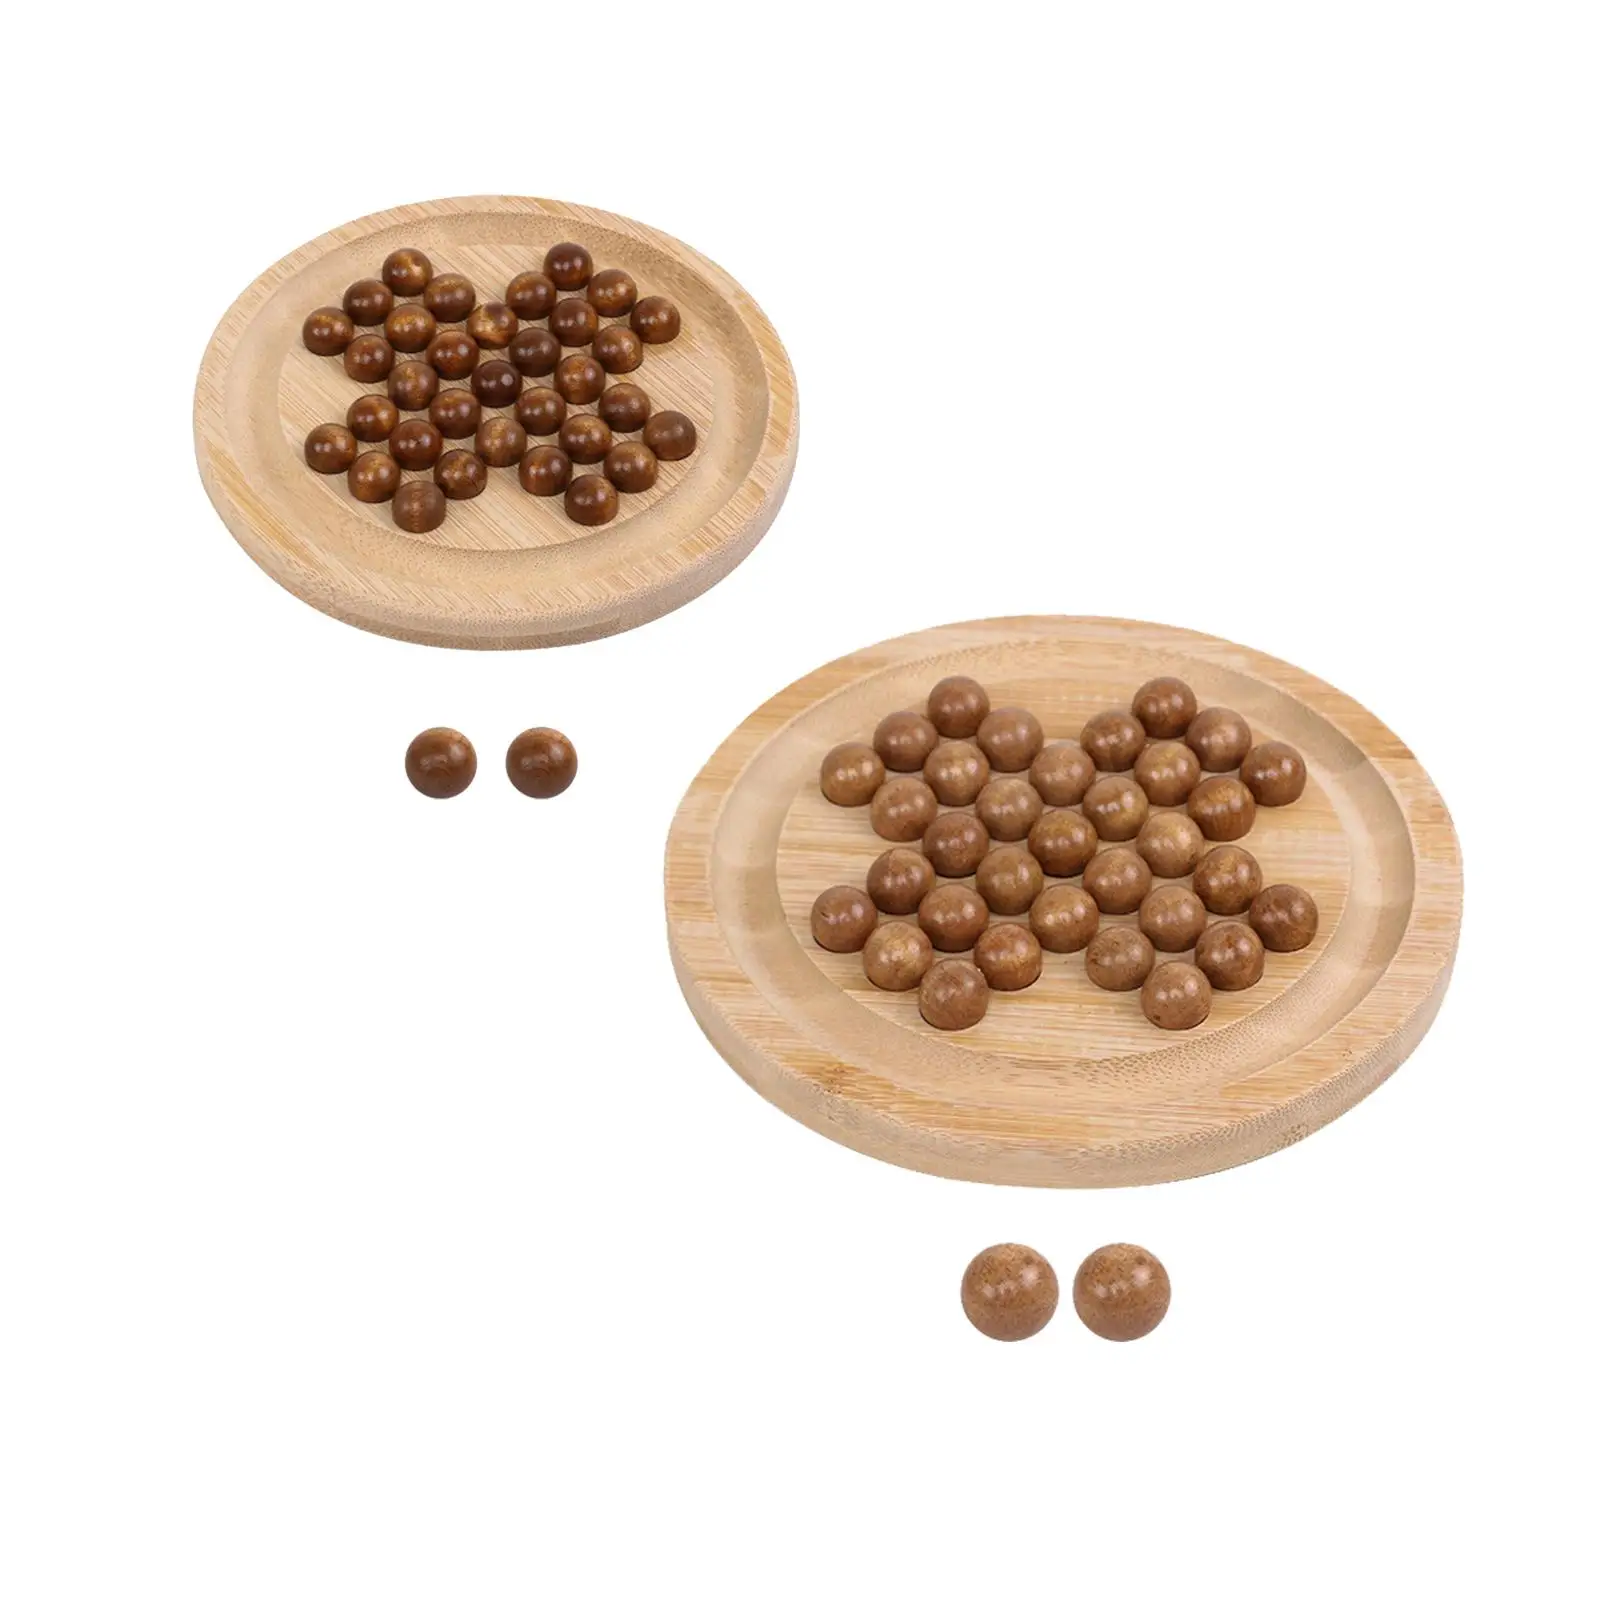 Wooden Peg Solitaire Board Game Living Room Decor with 33 Glass Balls Pegs Educational Family Game Marbles Game Board for Kids